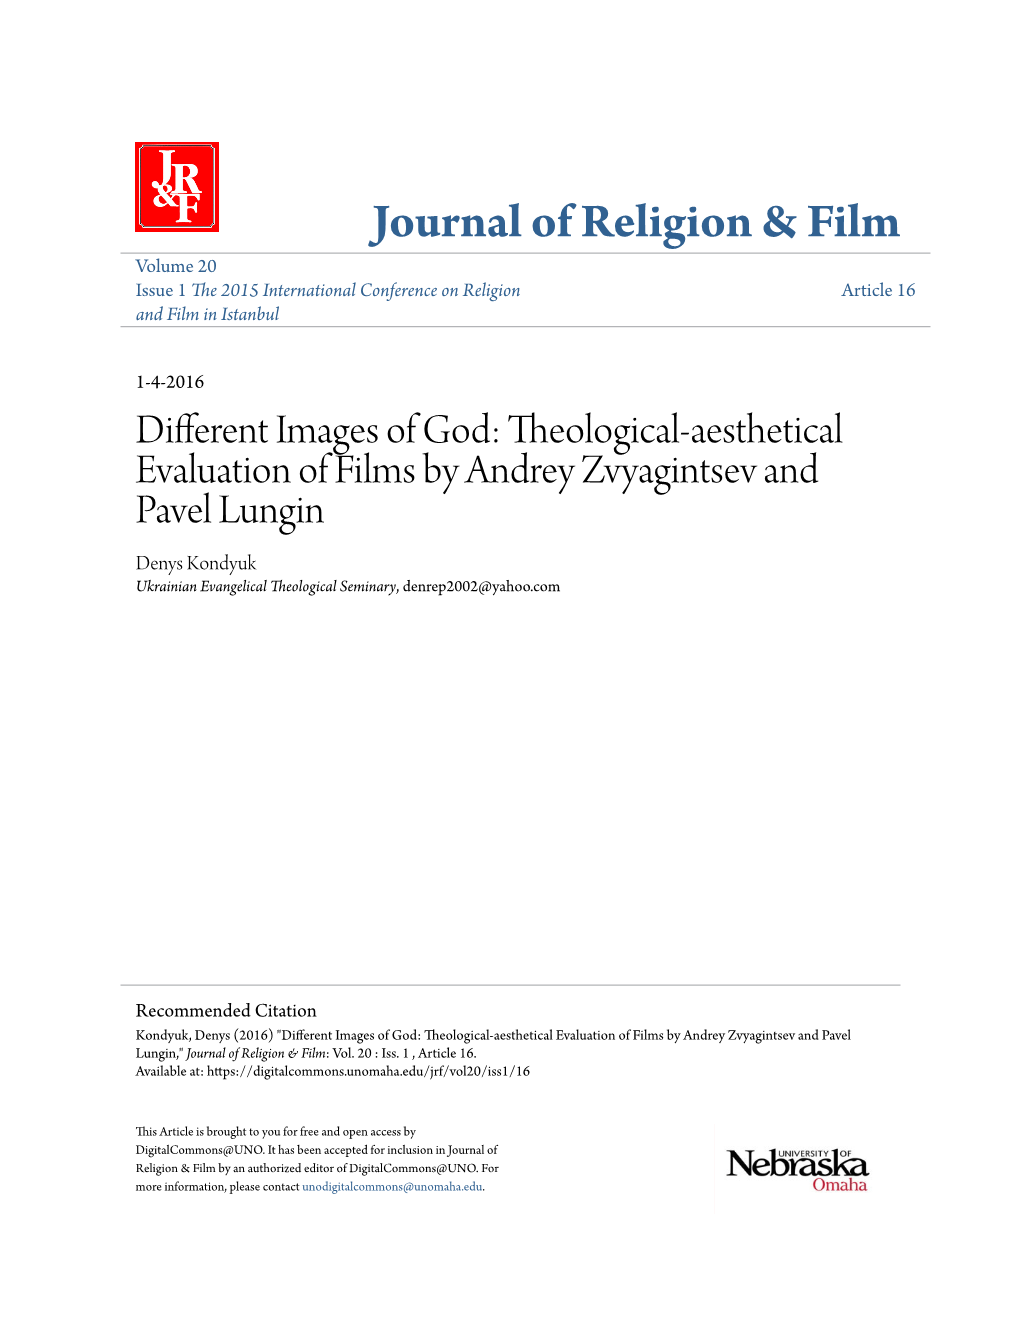 Different Images of God: Theological-Aesthetical Evaluation of Films by Andrey Zvyagintsev and Pavel Lungin